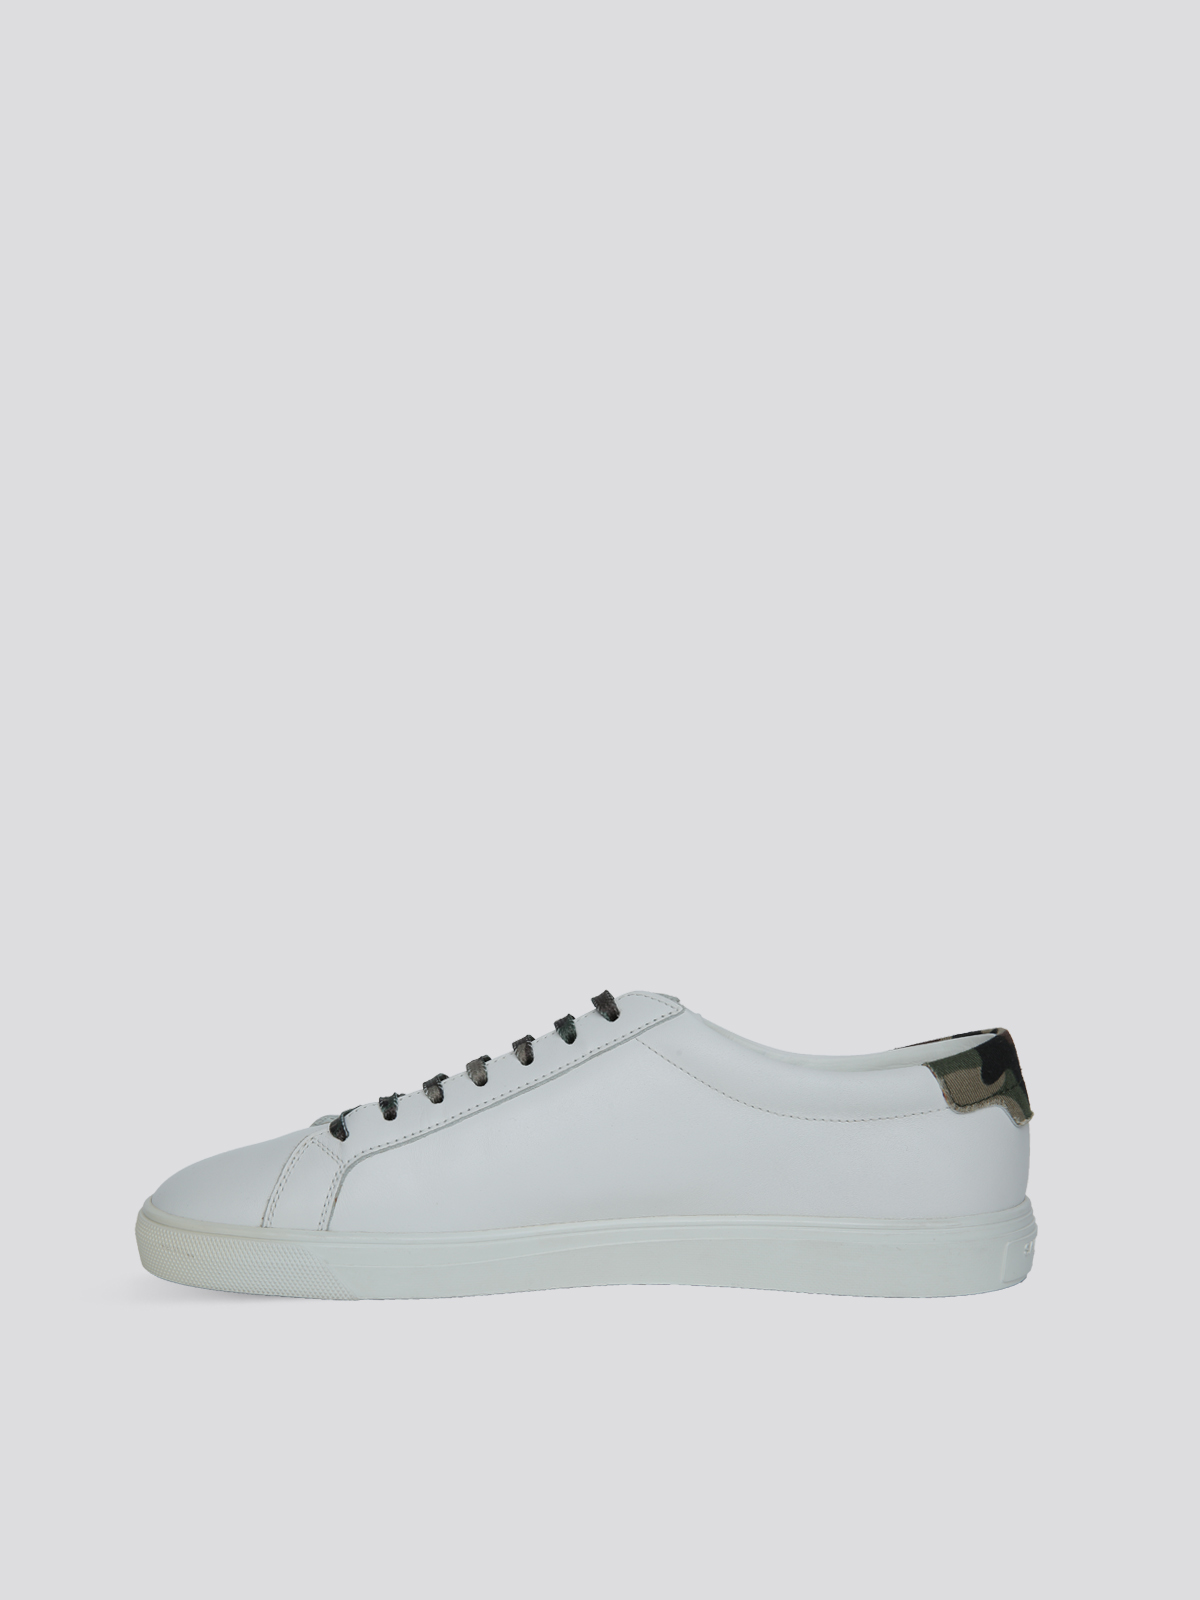 Saint Laurent Leather Sneakers - White Sneakers, Shoes - SNT245714